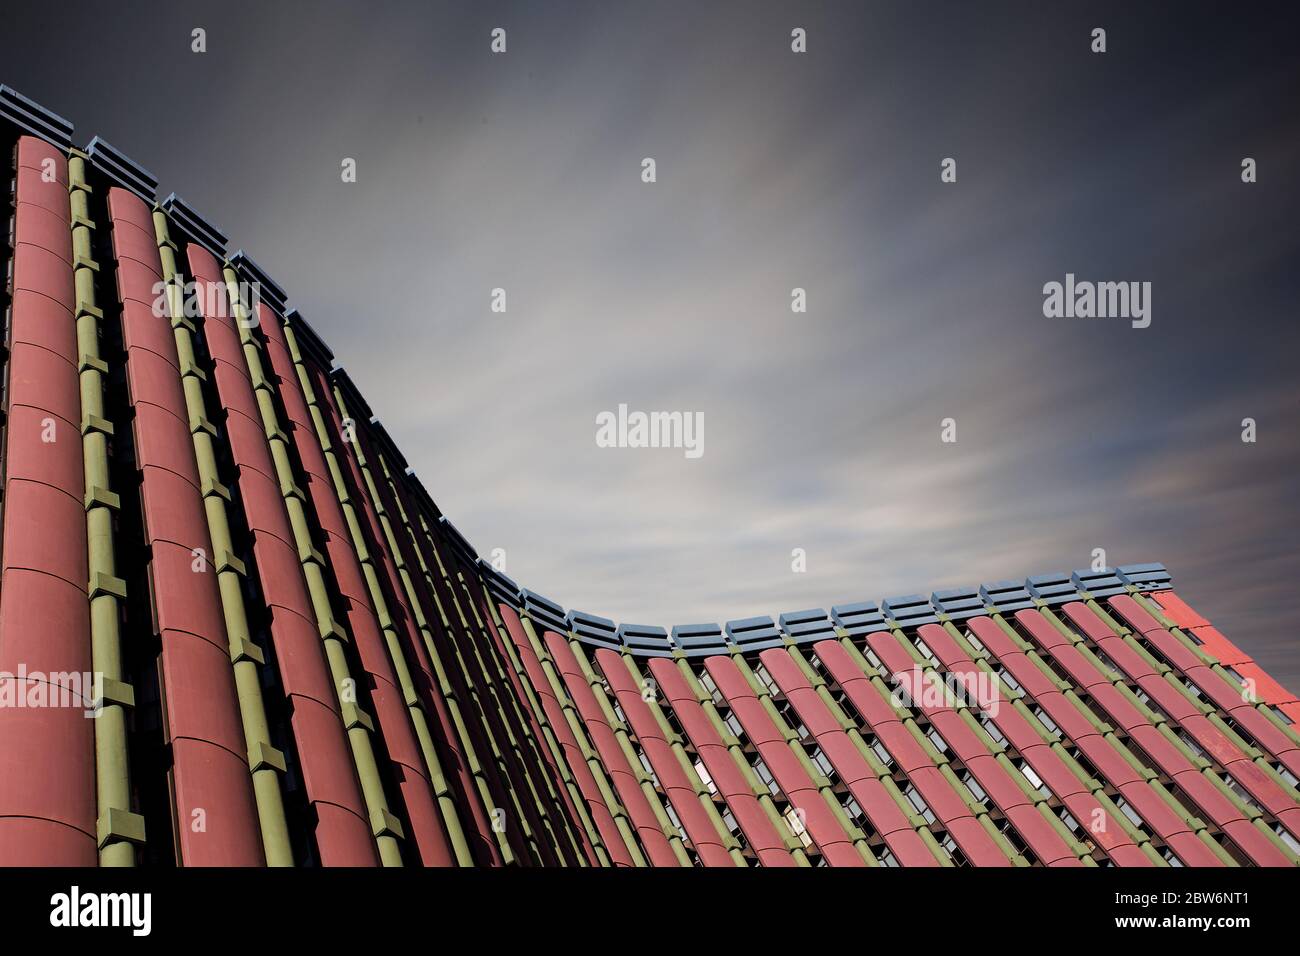 abstract architecture lines form Stock Photo